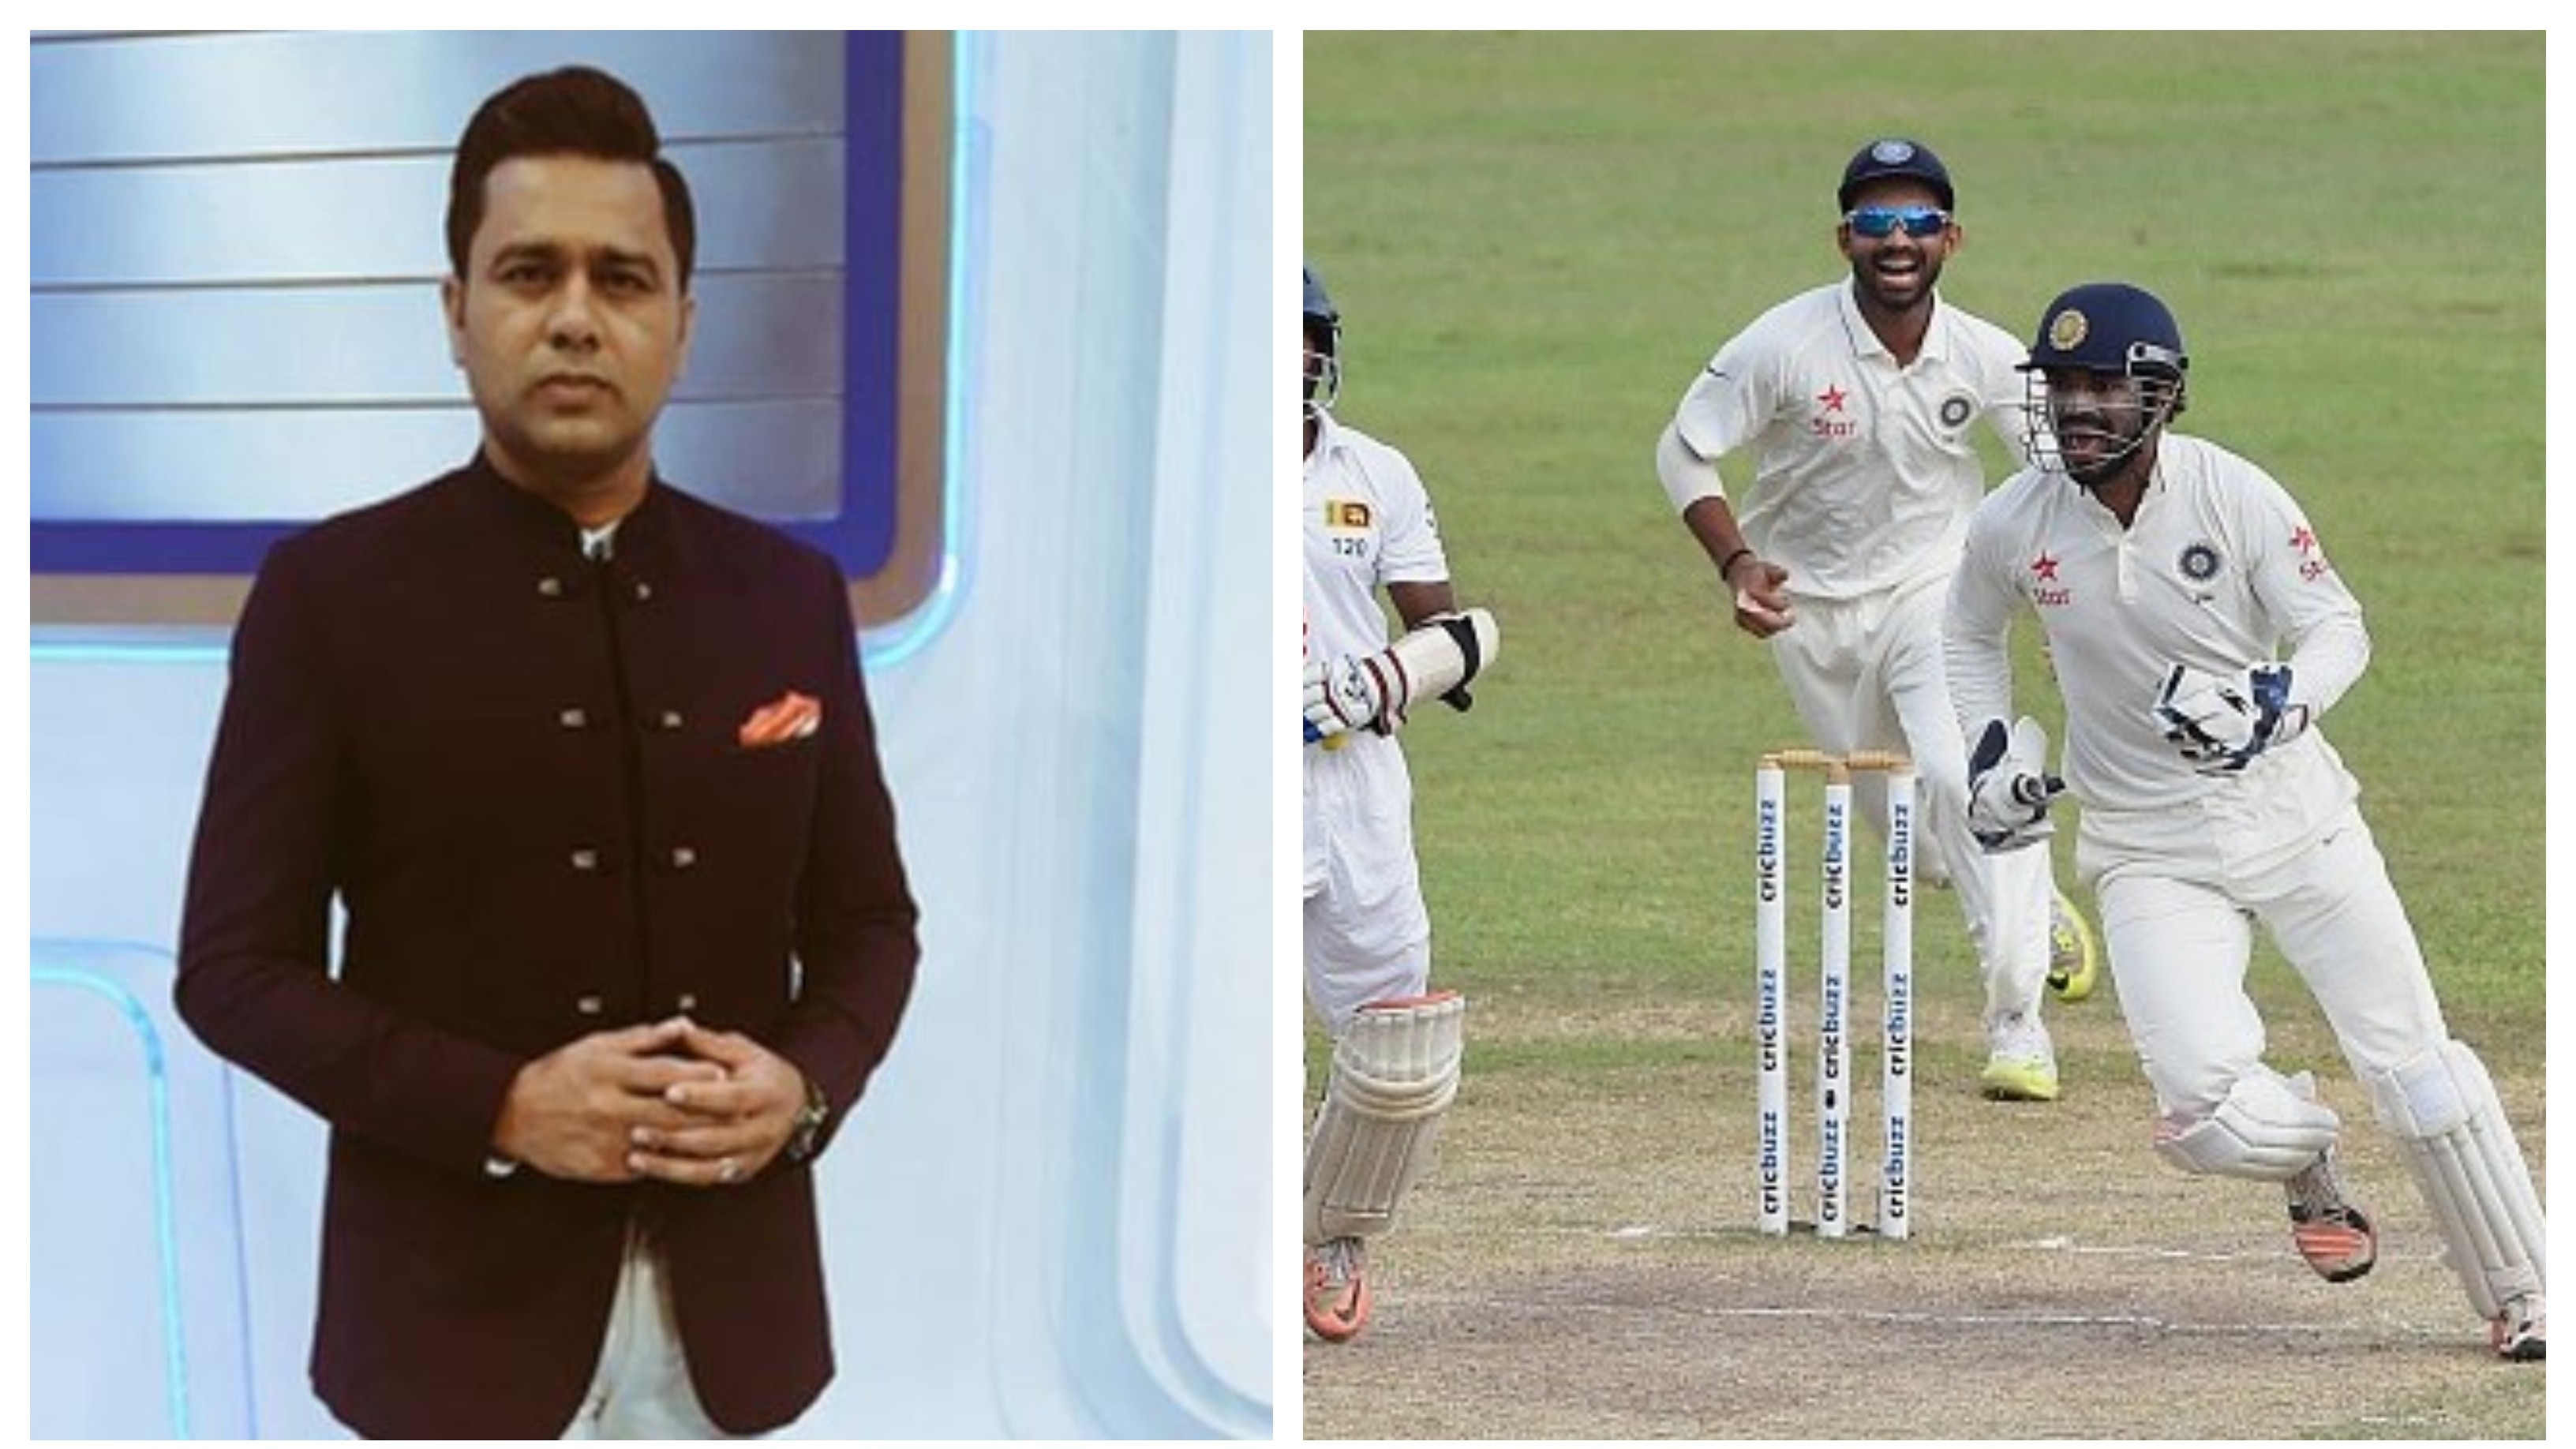 Aakash Chopra explains why KL Rahul shouldn't keep wickets in Test matches